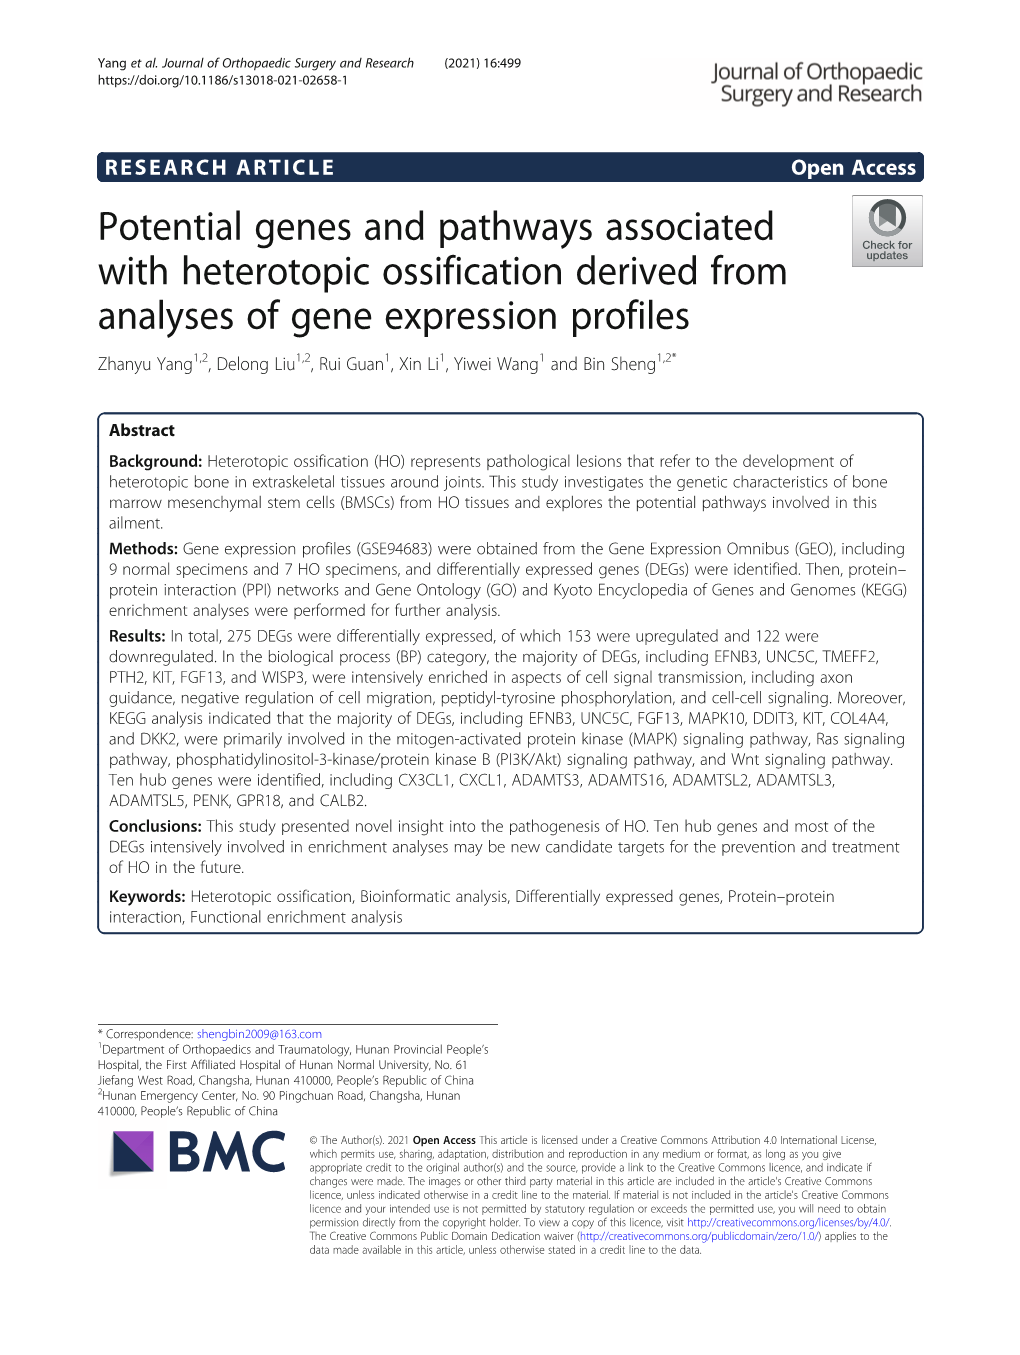 Potential Genes and Pathways Associated with Heterotopic